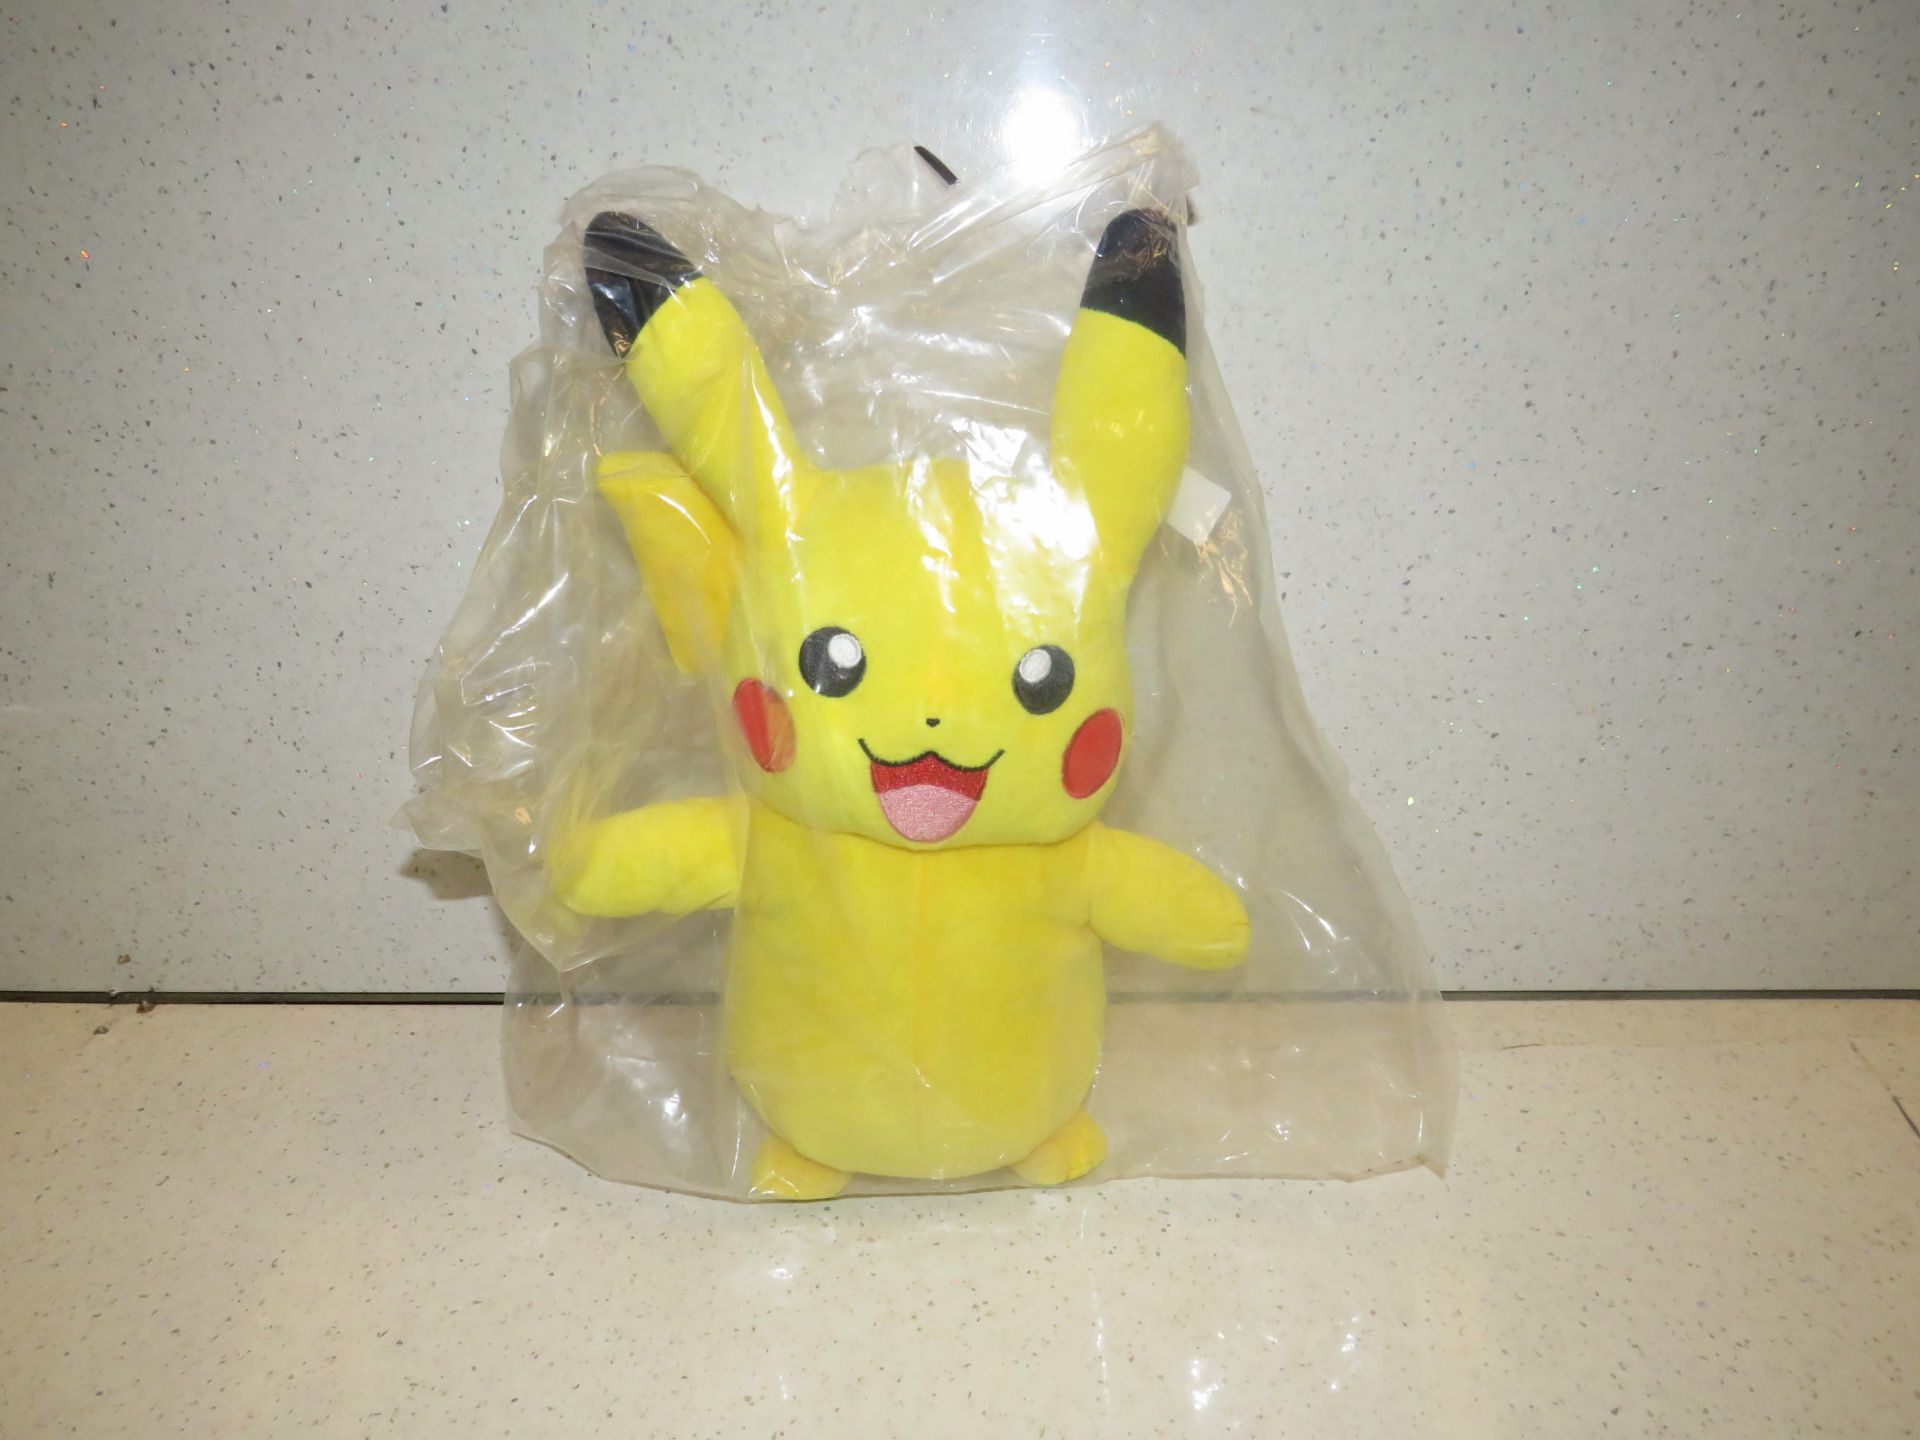 Pokemon pikachu - Good condition & Powers on, However the arms sometimes gets stuck moving.